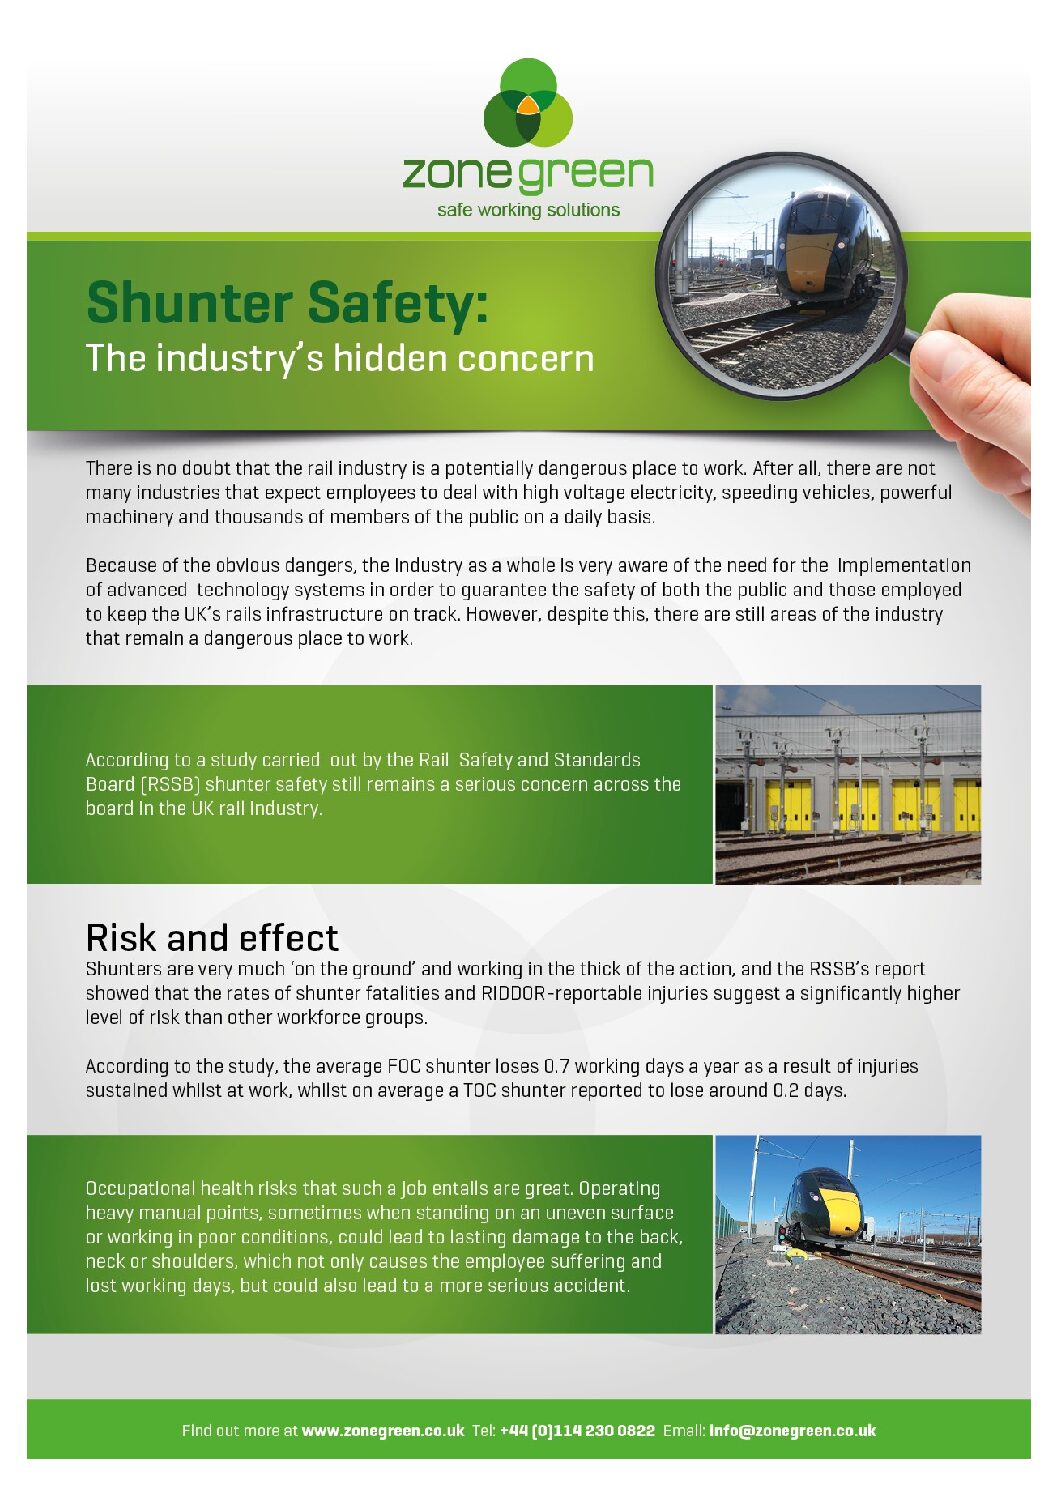 Shunter Safety: The Industry’s Hidden Concern